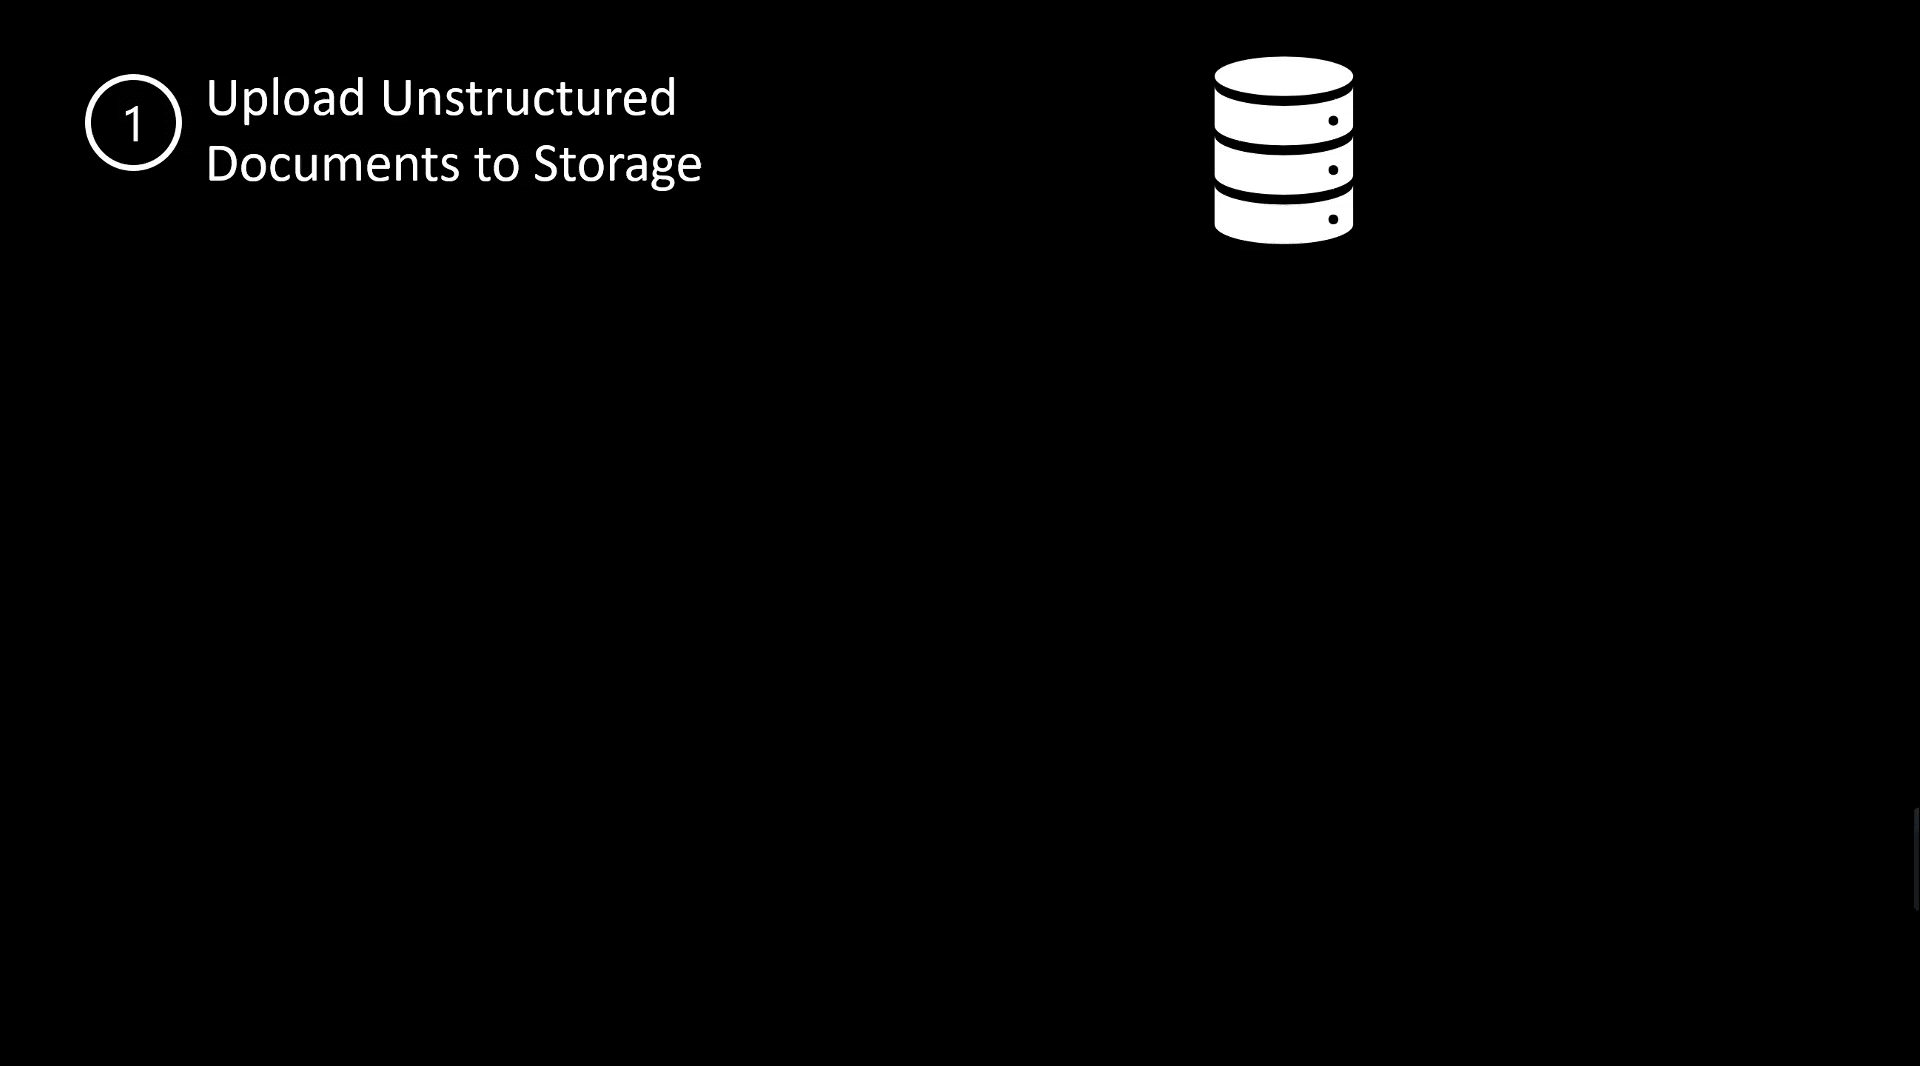  An animation that illustrates distributed form recognition and translation in SynapseML, which extracts multi-lingual insights from unstructured collections of documents. The steps include: 1) upload unstructured documents from storage, 2) apply distributed form recognition, 3) learn form ontologies, 4) apply distribution translation, and 5) visualize results.
